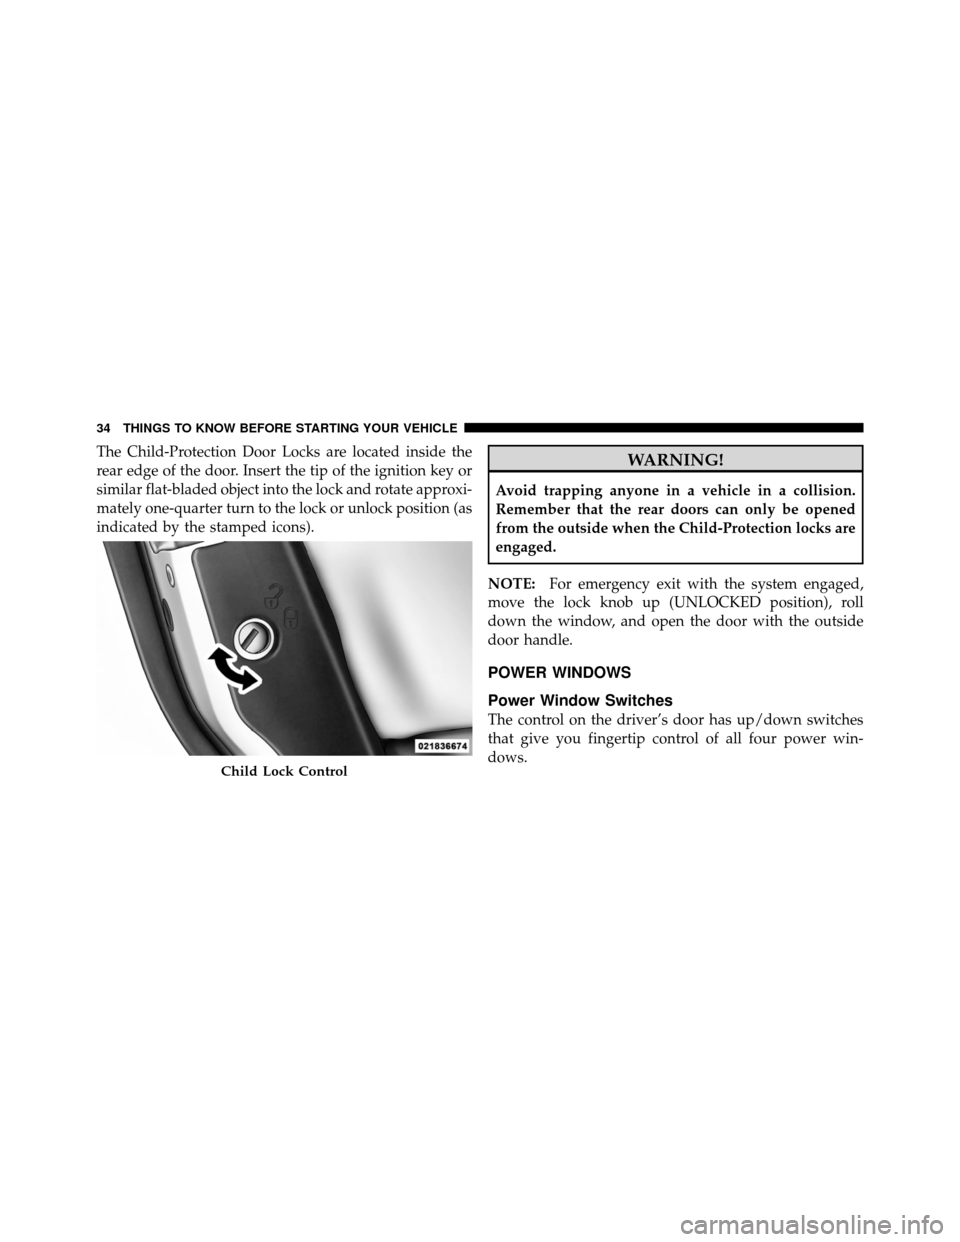 CHRYSLER 200 2011 1.G Owners Guide The Child-Protection Door Locks are located inside the
rear edge of the door. Insert the tip of the ignition key or
similar flat-bladed object into the lock and rotate approxi-
mately one-quarter turn